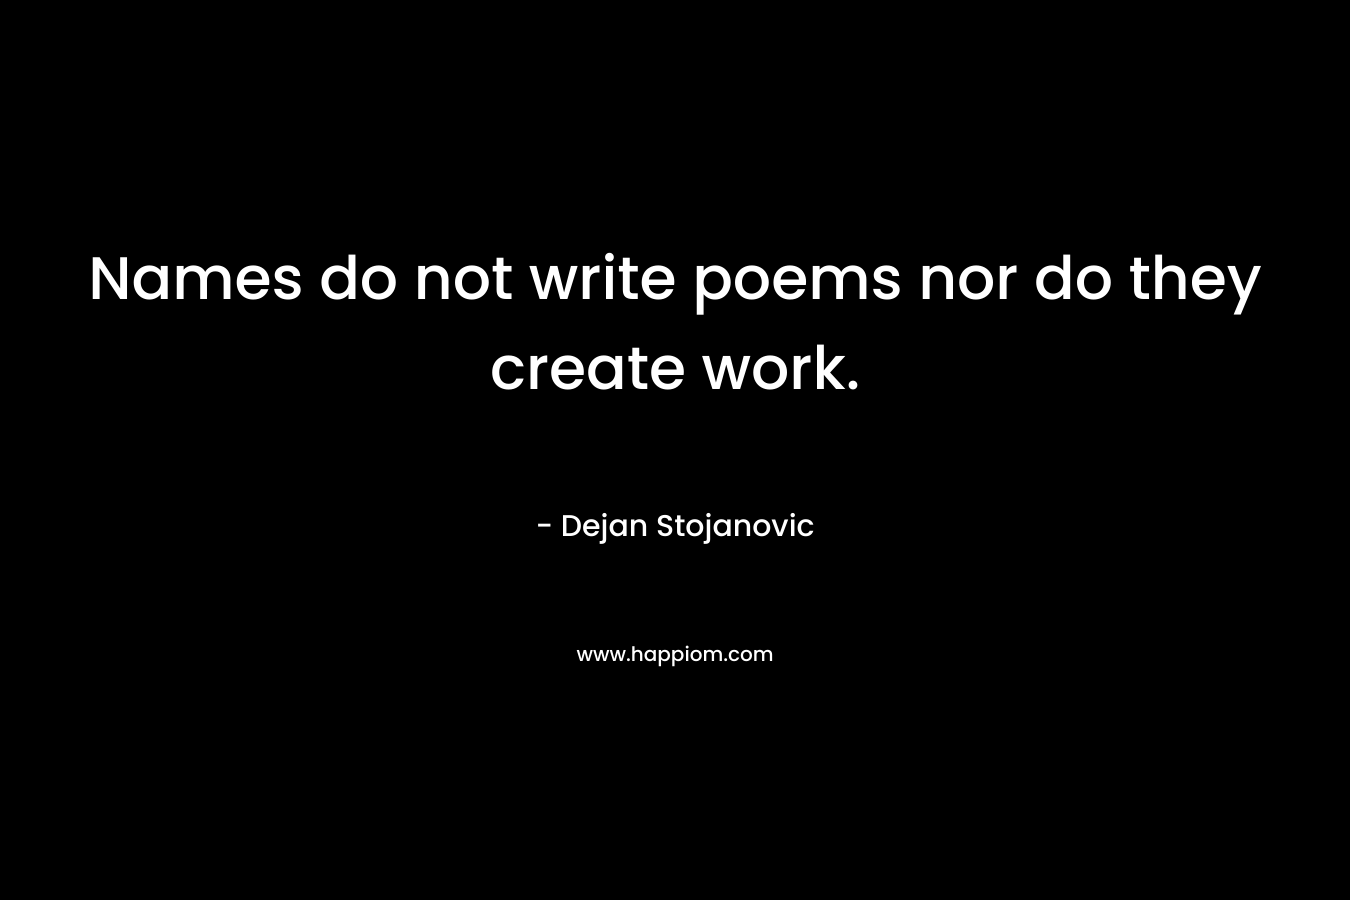 Names do not write poems nor do they create work.